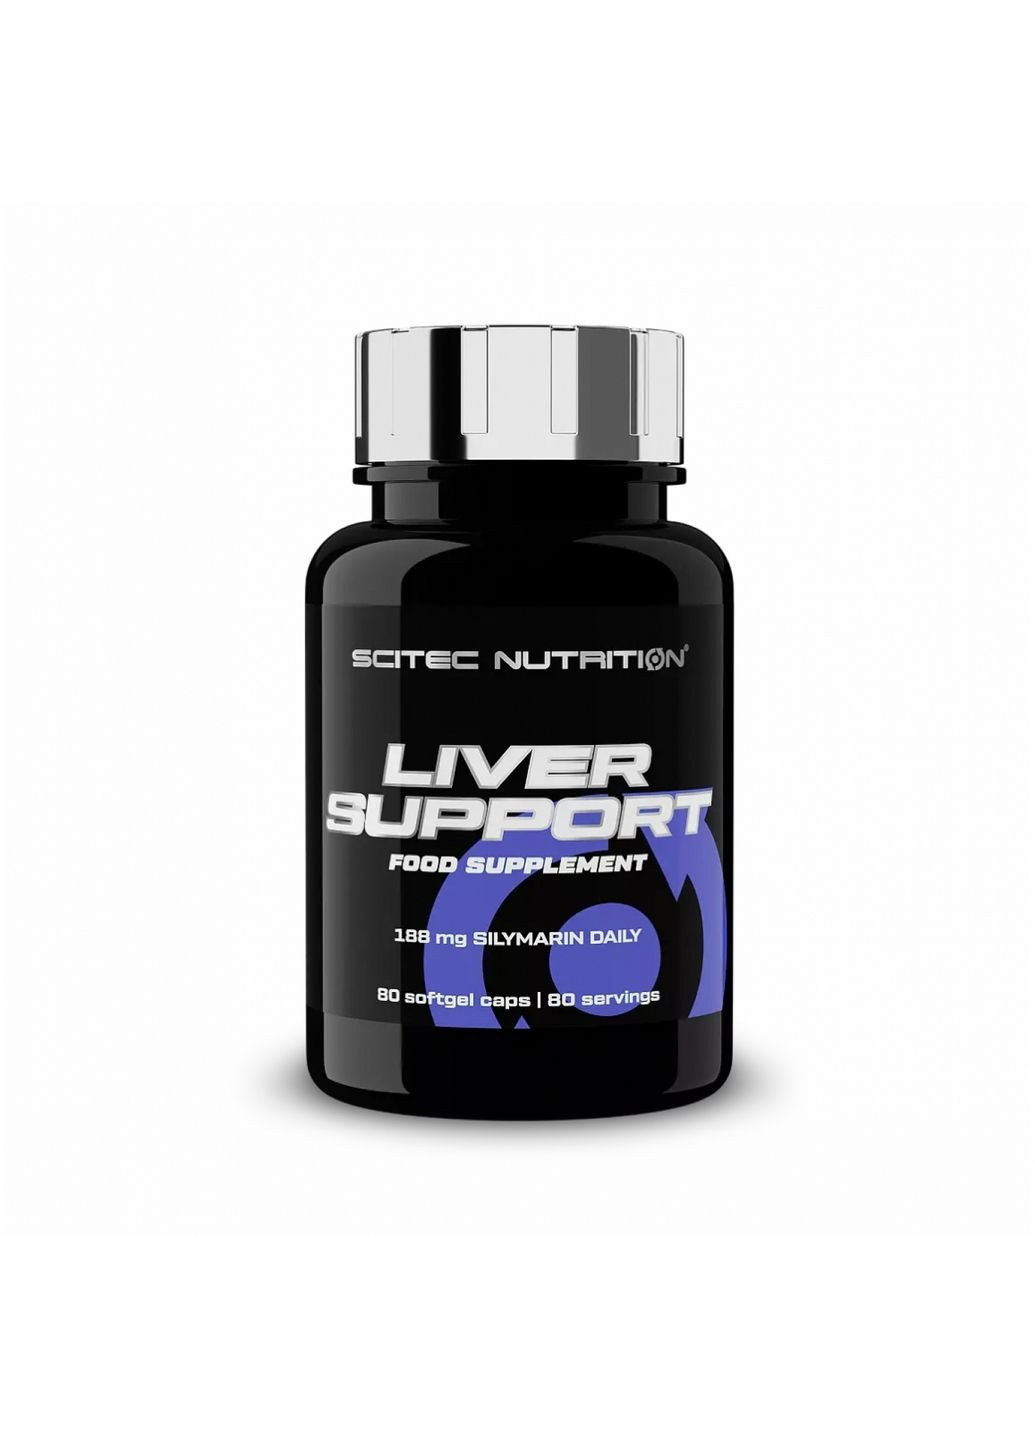 Натуральна добавка Scitec Liver Support, 80 капсул Scitec Nutrition (293477561)